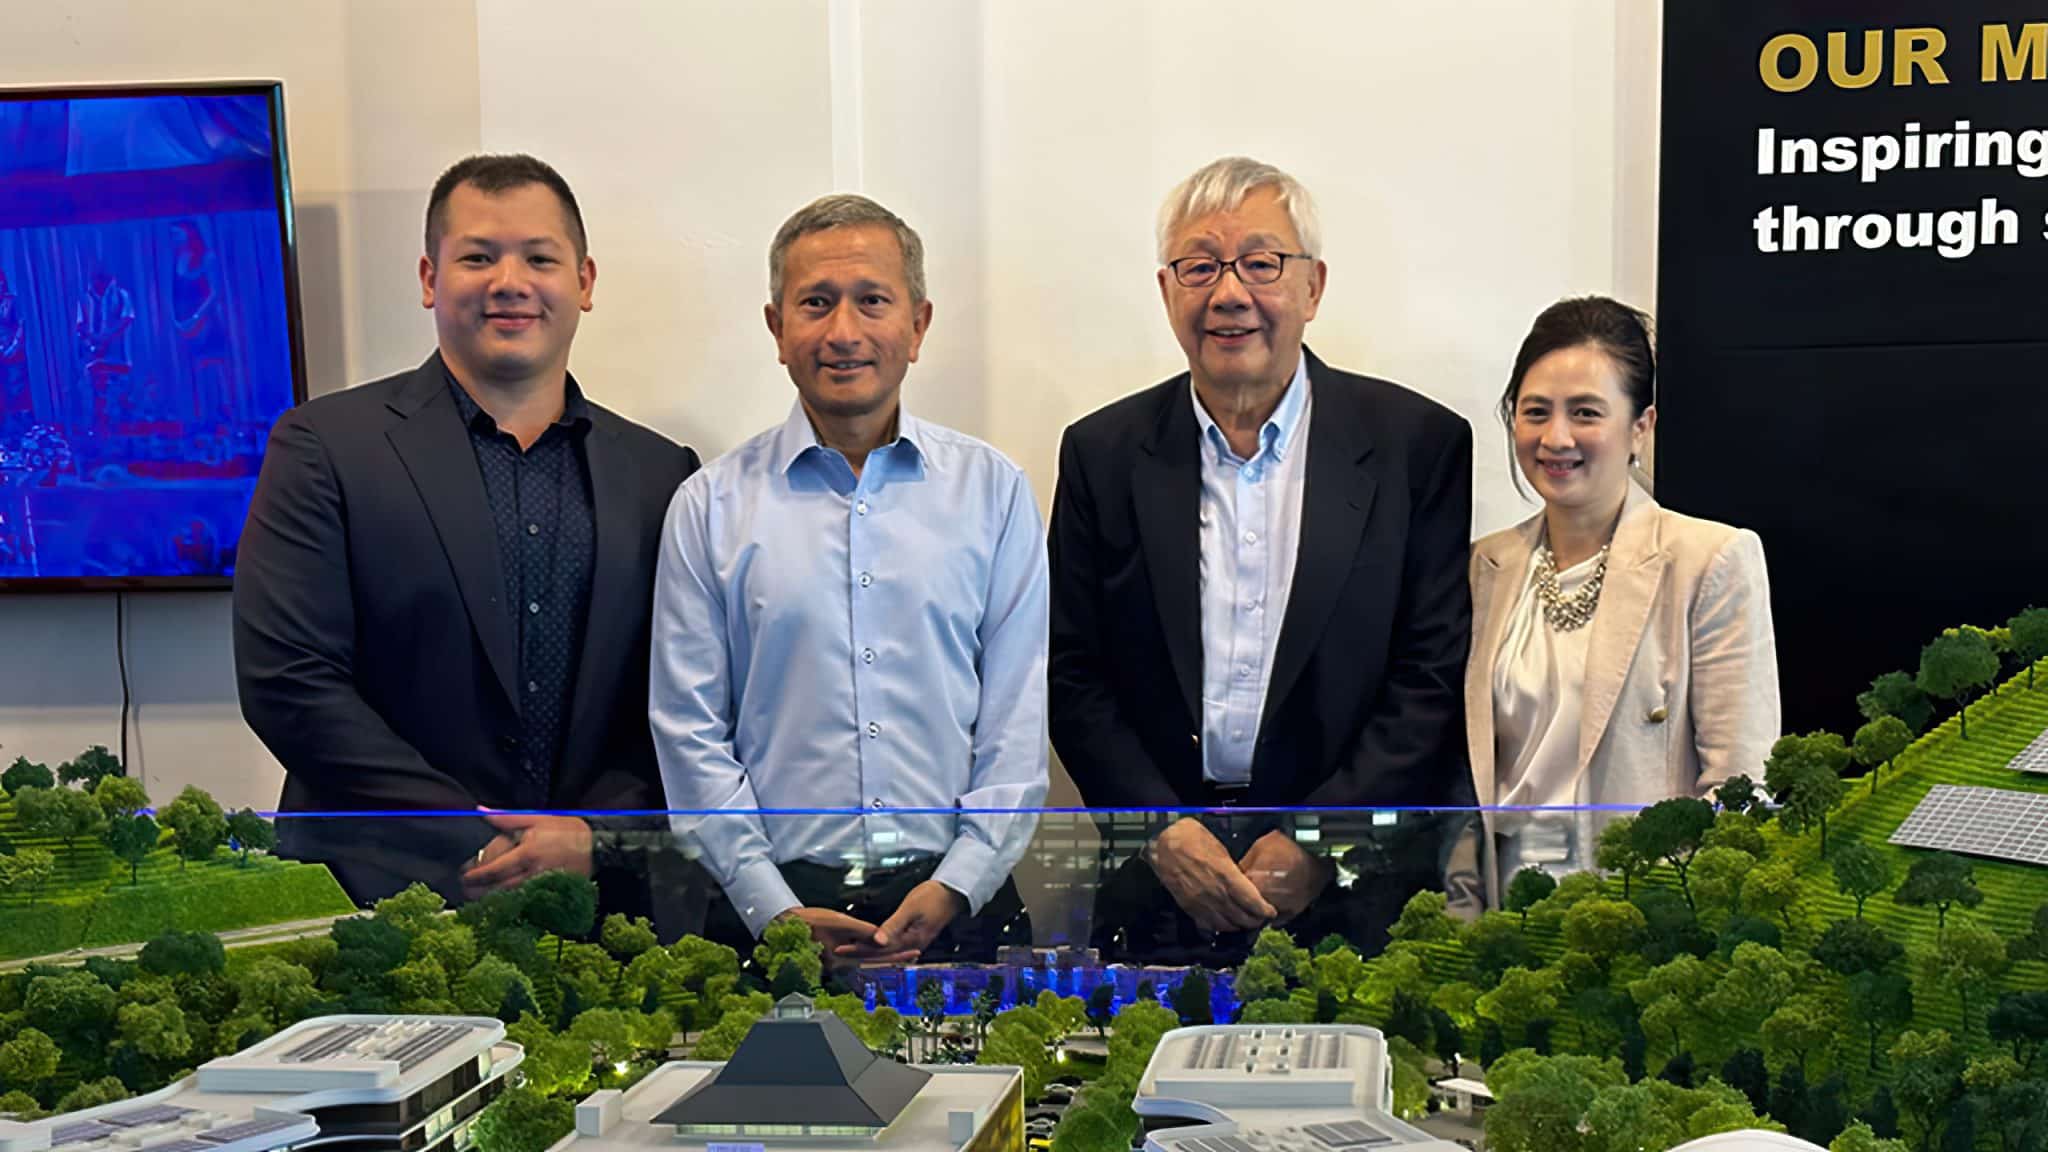 Minister of Foreign Affairs Vivian Balakrishnan (in blue) with Datuk Edward Ong (second from right) at the Pelican Paradise office in Timor-Leste during the former's visit in July 2023. All photos courtesy of Datuk Edward Ong.